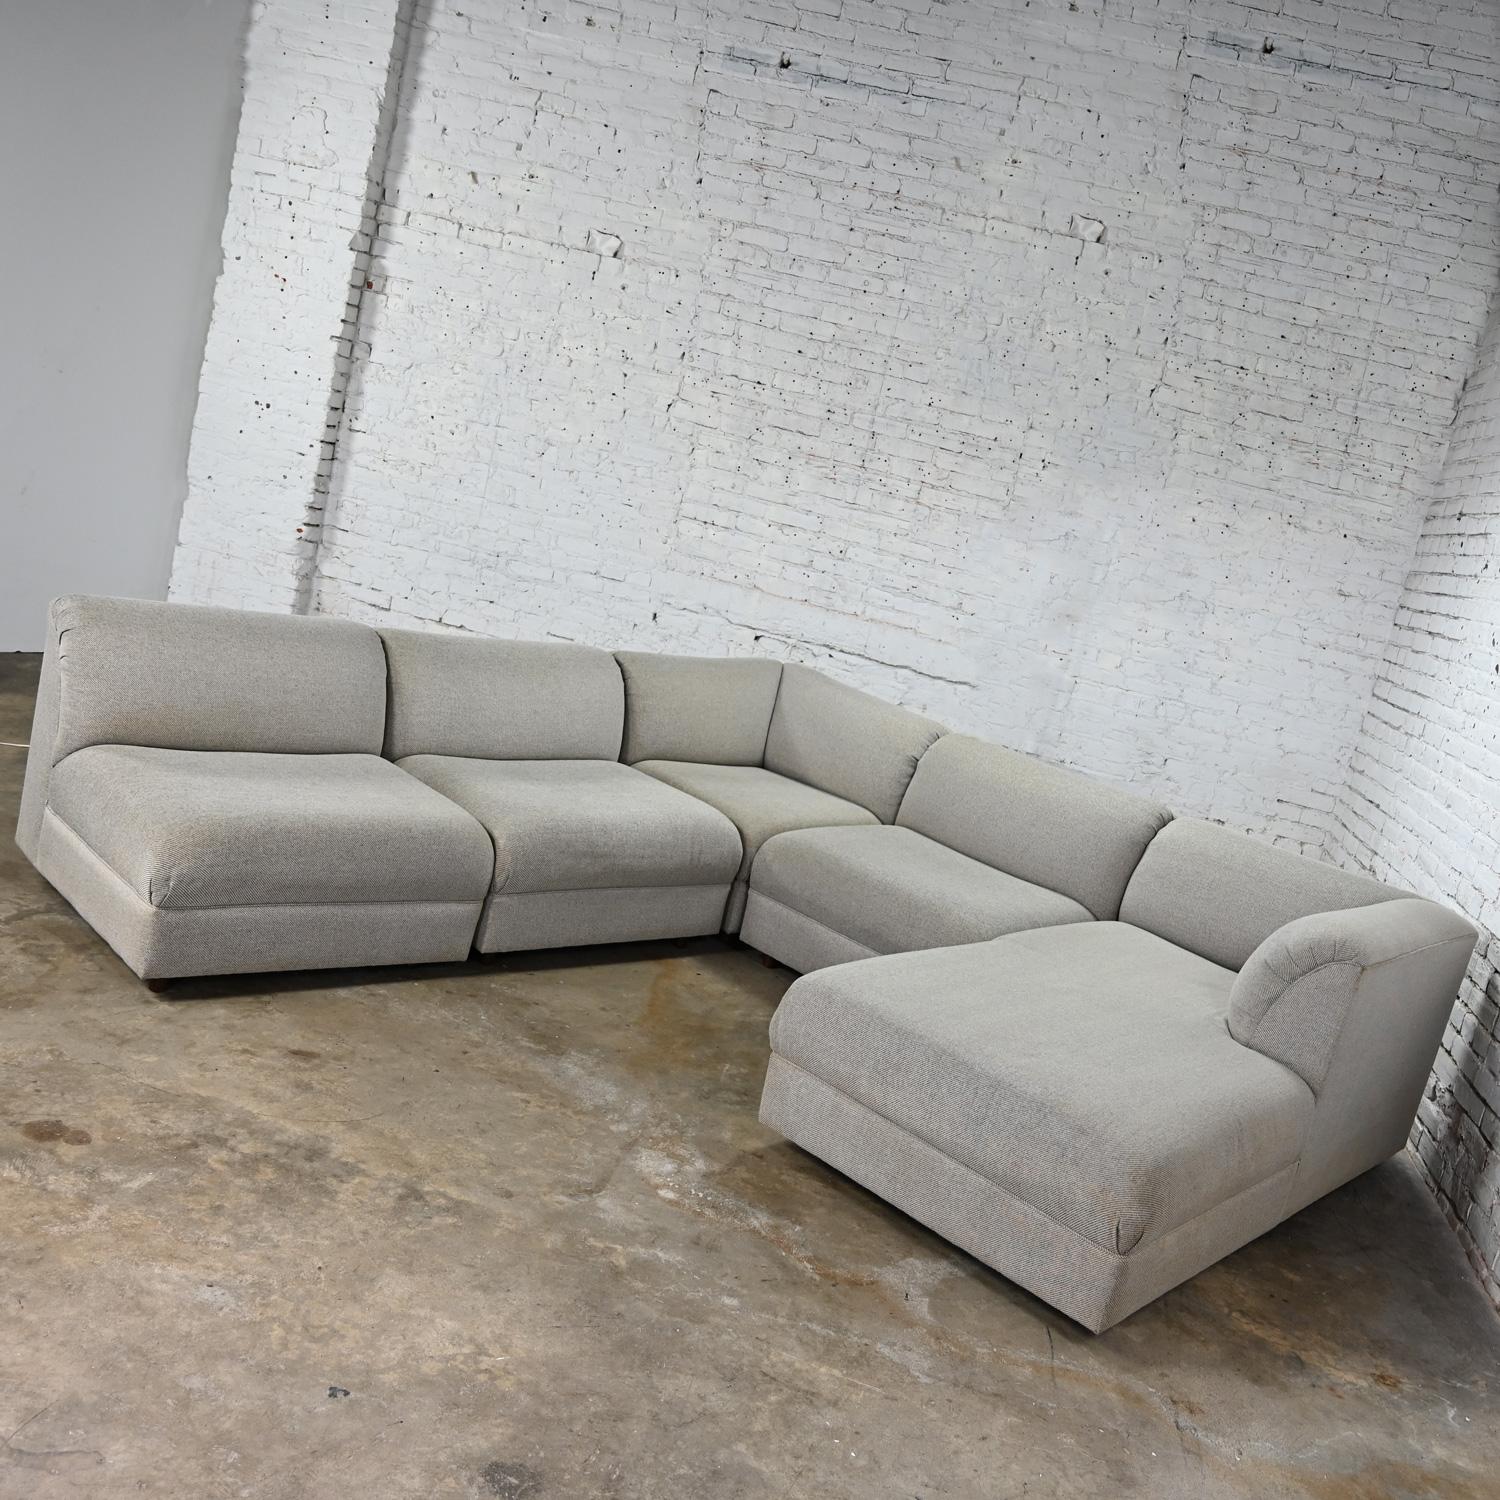 Late 20th Century Modern Modular Sectional Sofa 5 Pieces with Chaise Gray Tweed  In Good Condition For Sale In Topeka, KS